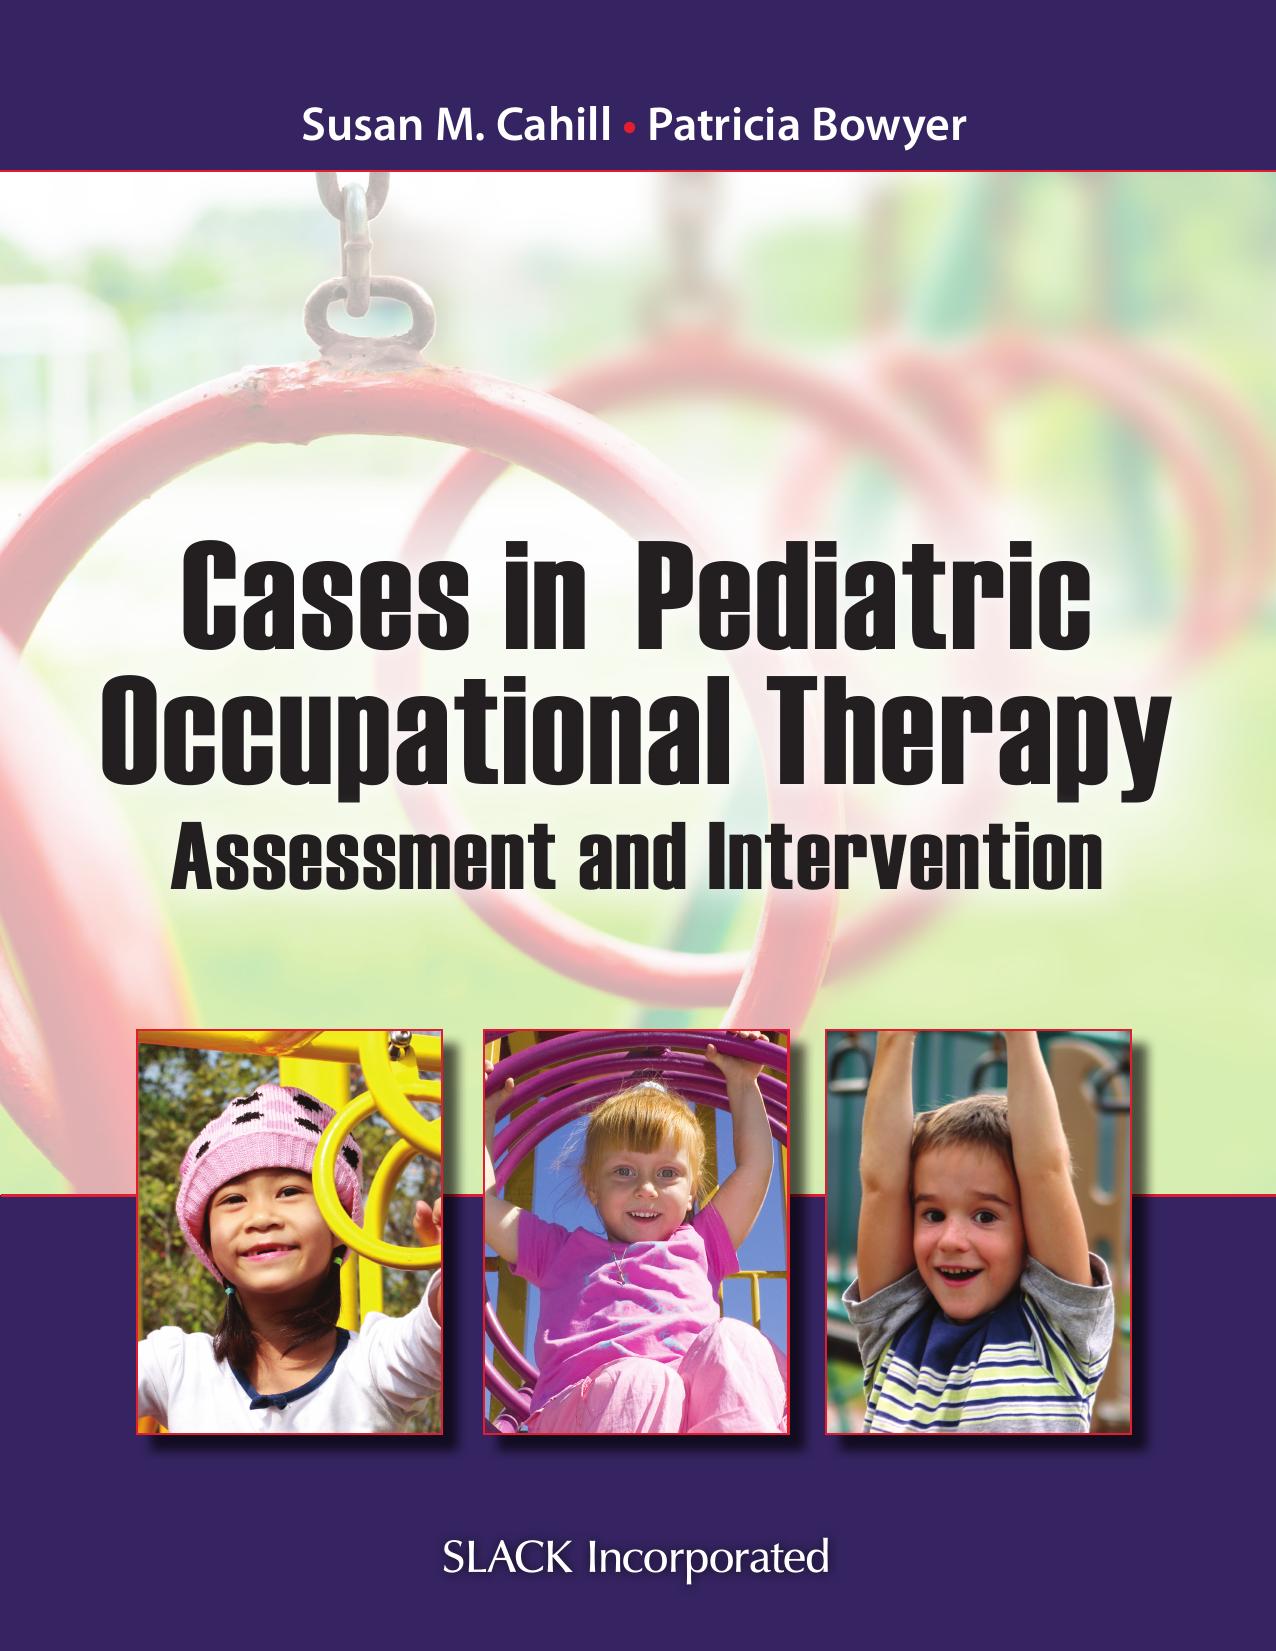 Cases in Pediatric Occupational Therapy Assessment and Intervent.jpg